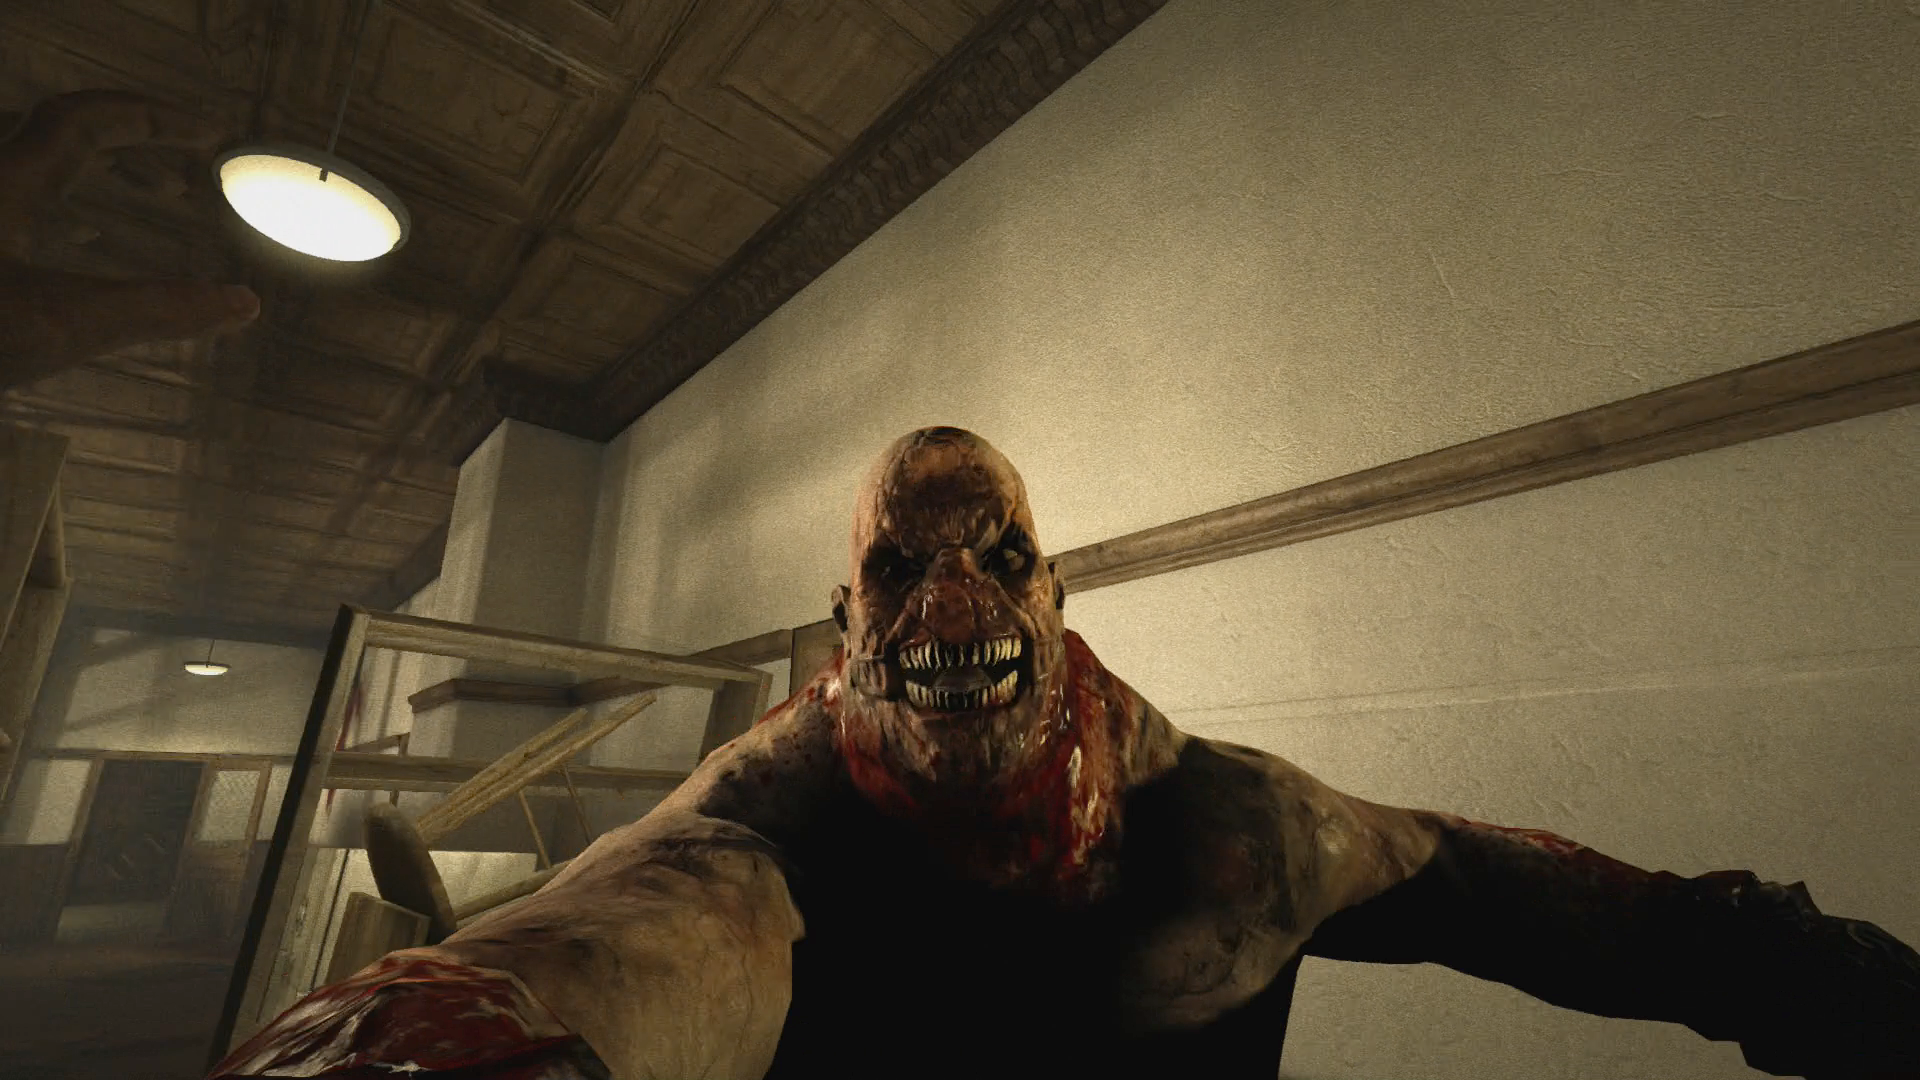 download outlast pc torrent